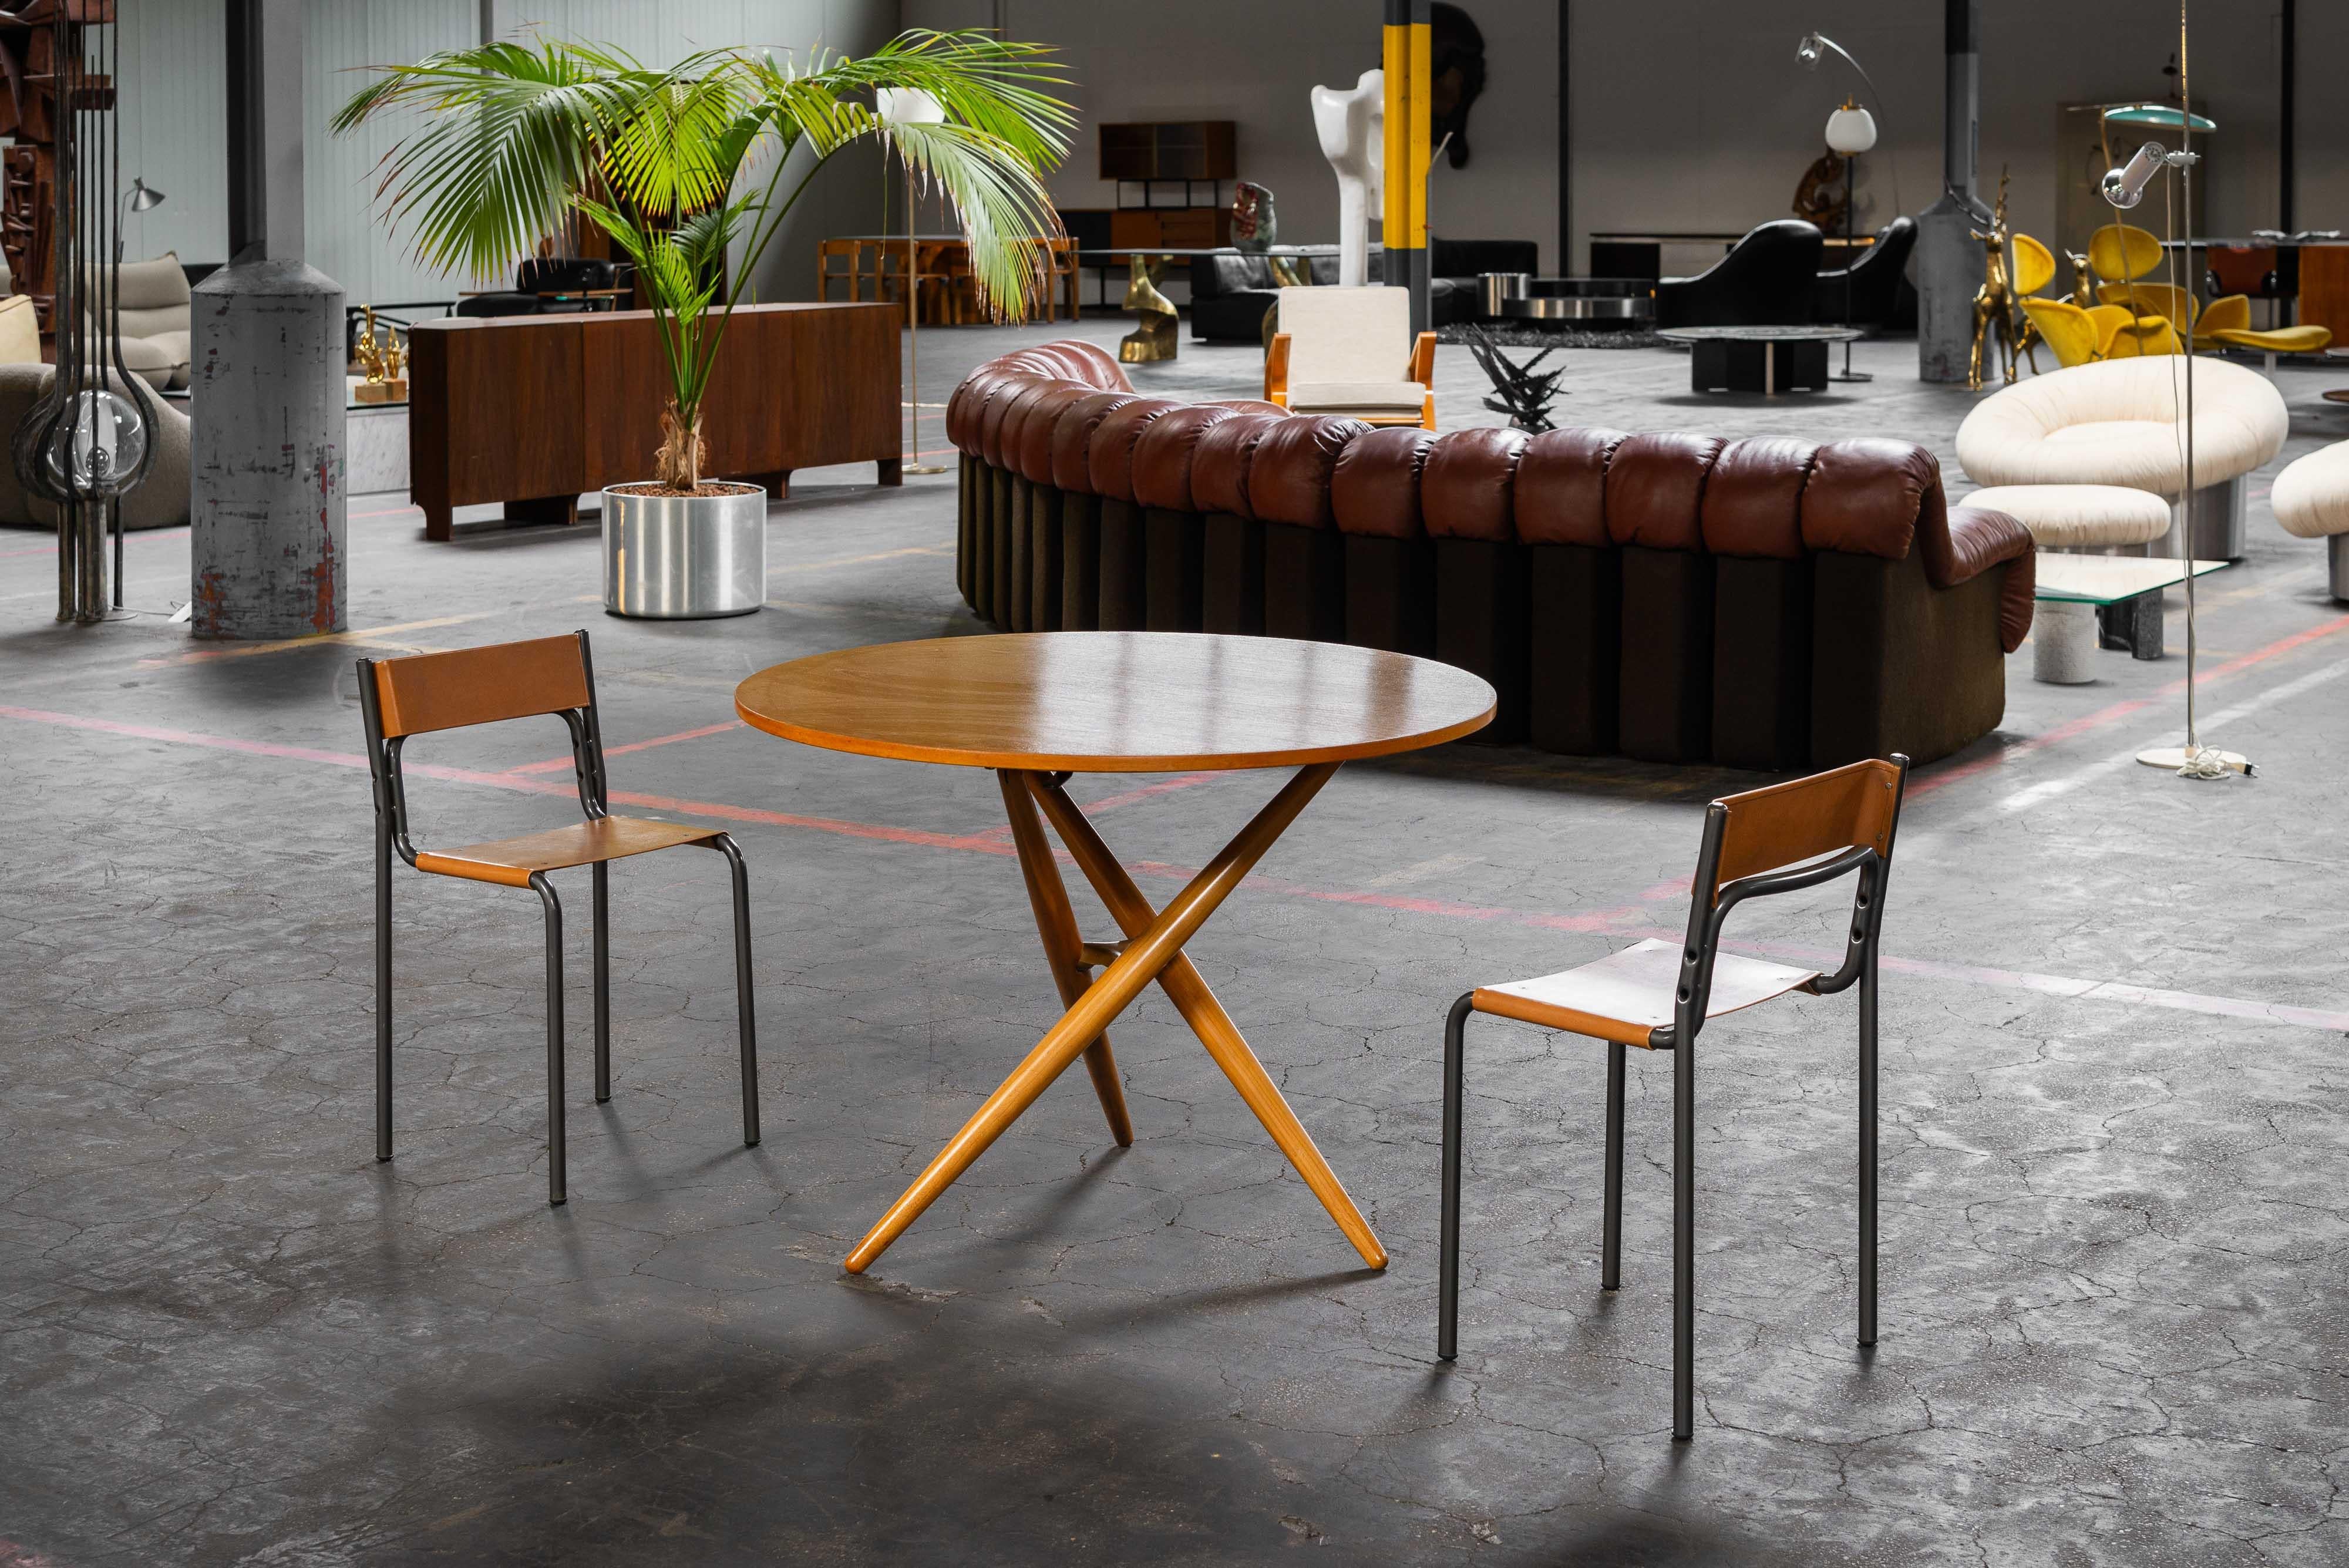 Mulfifunctional S.T. table designed by Jürg Bally and manufactured by Wohnlife in Switzerland in 1951. The S.T-Tich table cleverly combines functionality and aesthetics. Its German name, a play on 